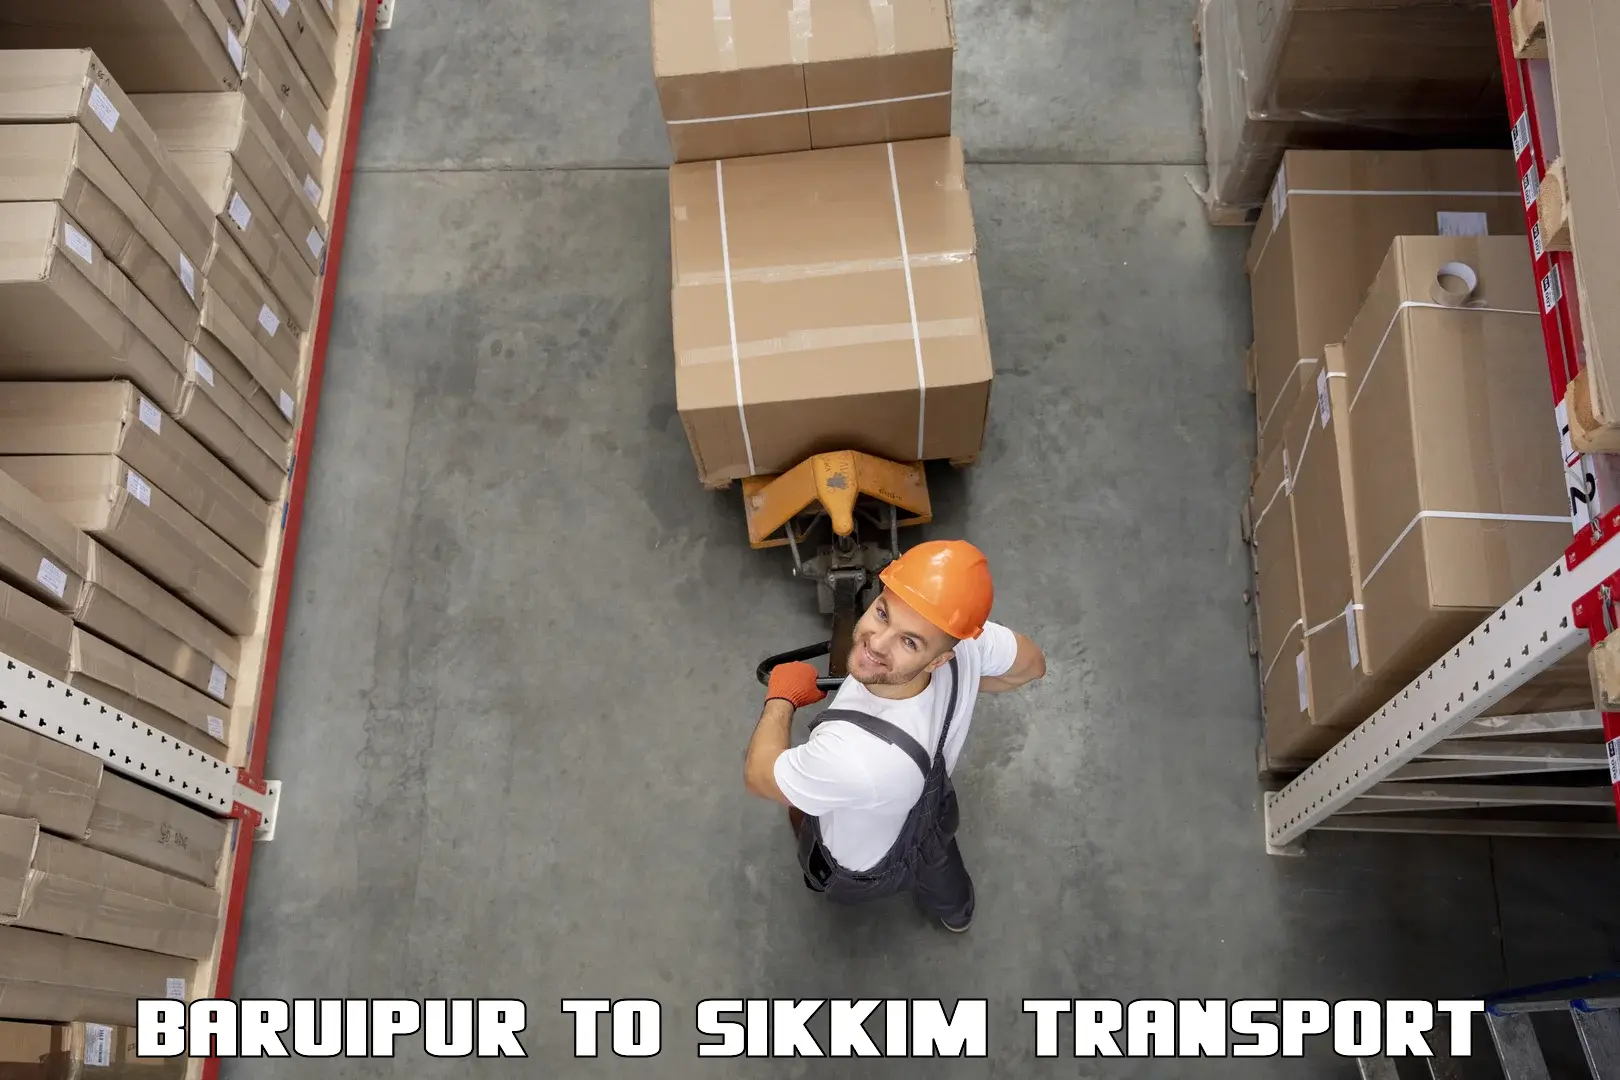 Nationwide transport services Baruipur to South Sikkim